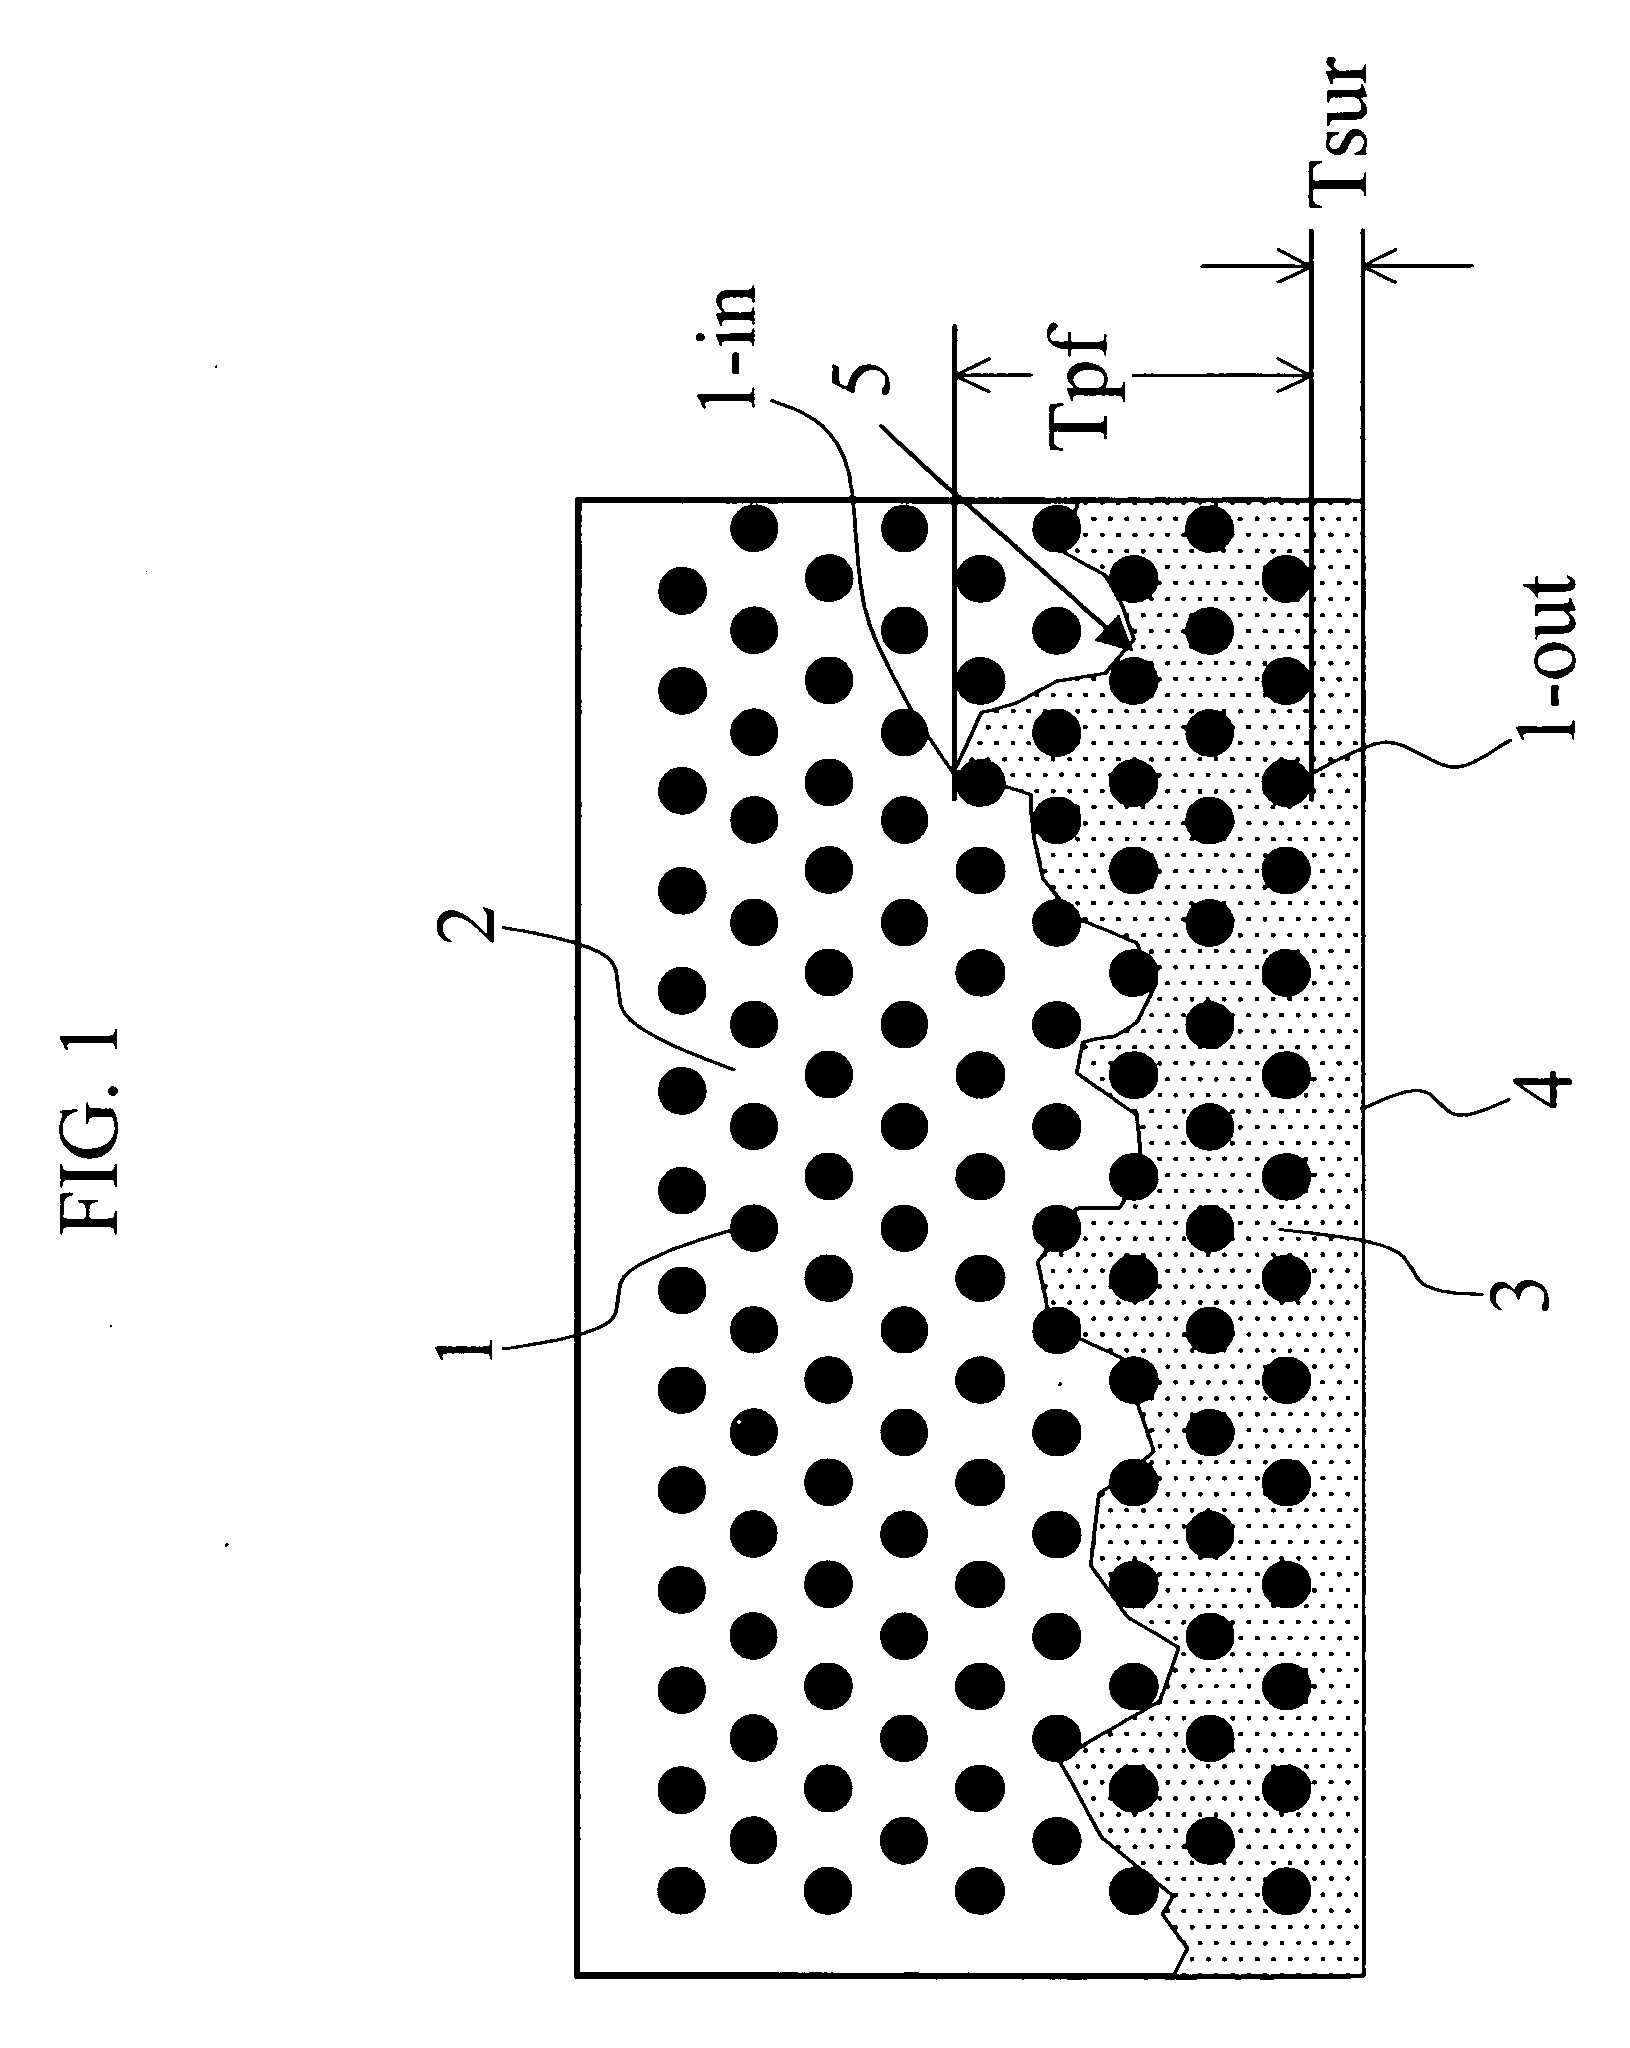 Epoxy Resin Composition for Carbon-Fiber-Reinforced Composite Material, Prepreg, Integrated Molding, Fiber-Reinforced Composite Sheet, and Casing for Electrical/Electronic Equipment